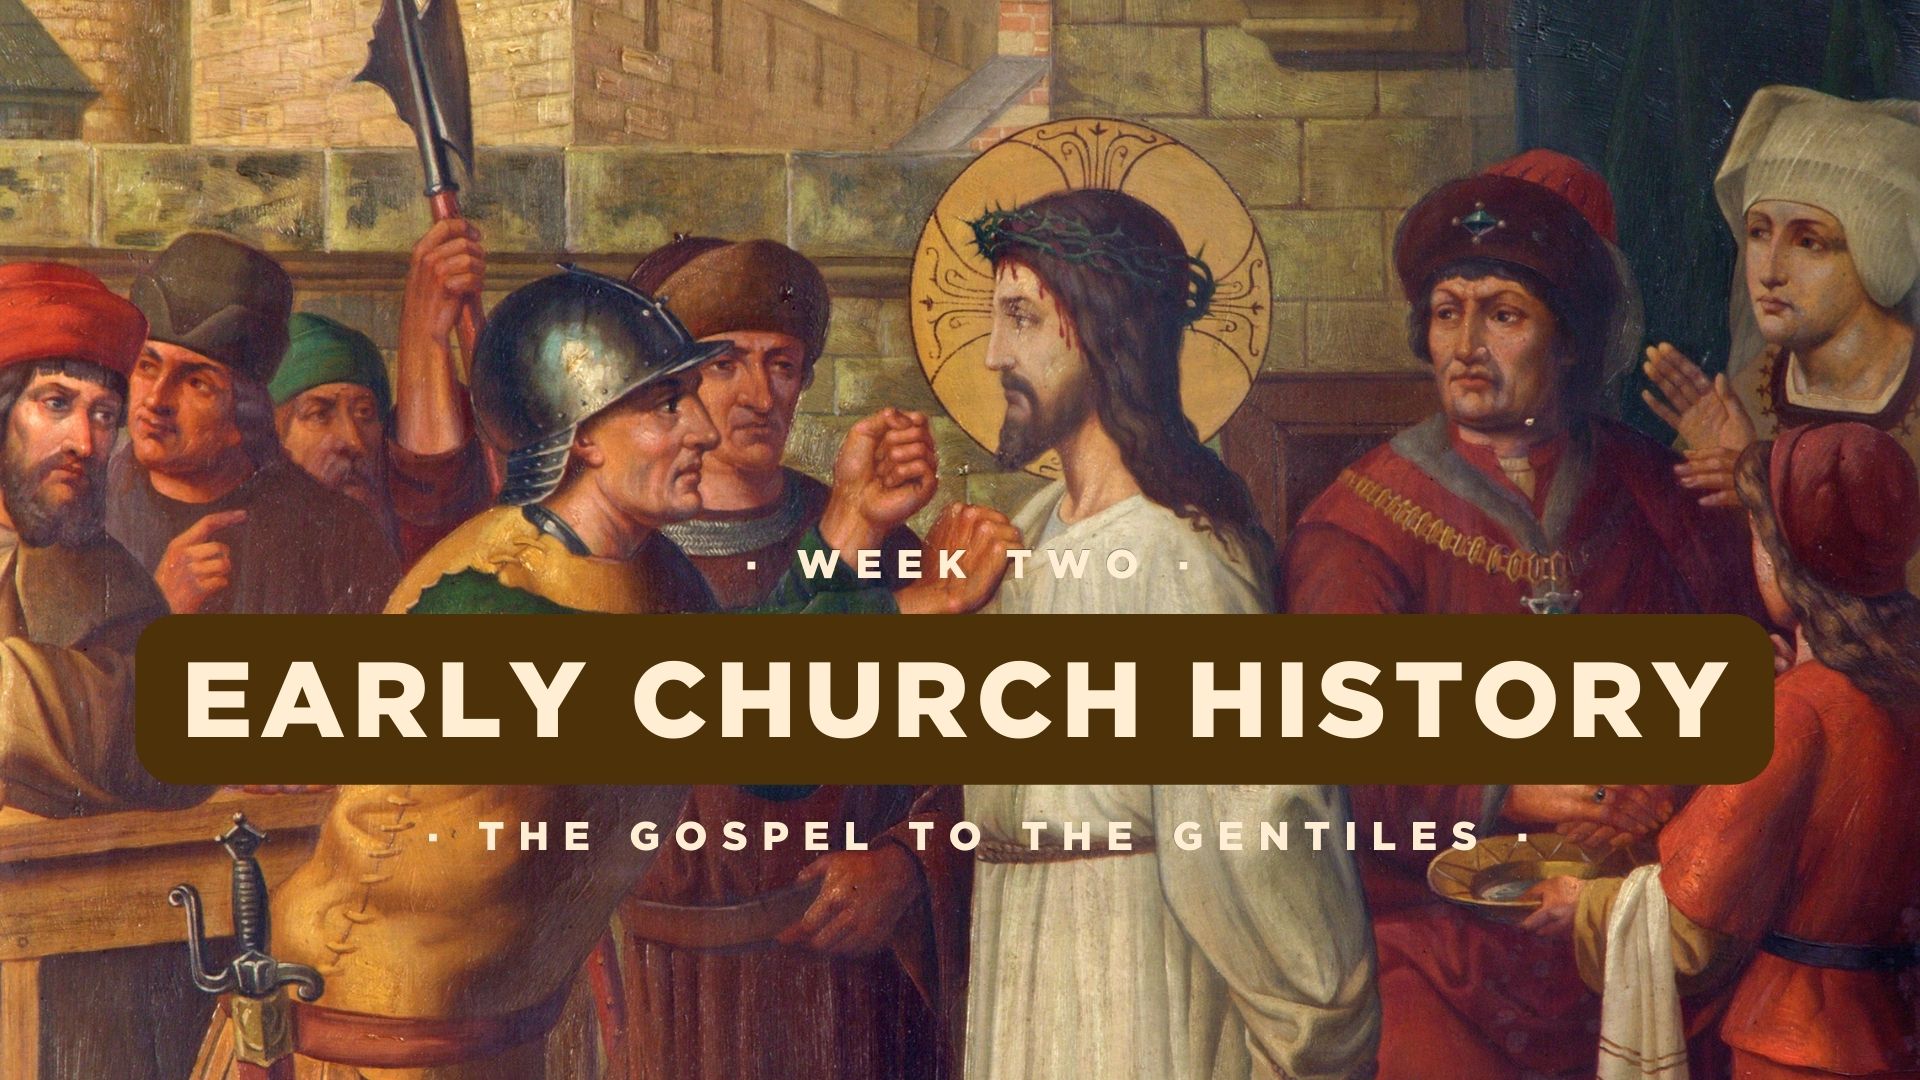 Early Church History - Week Two - Gospel to the Gentiles